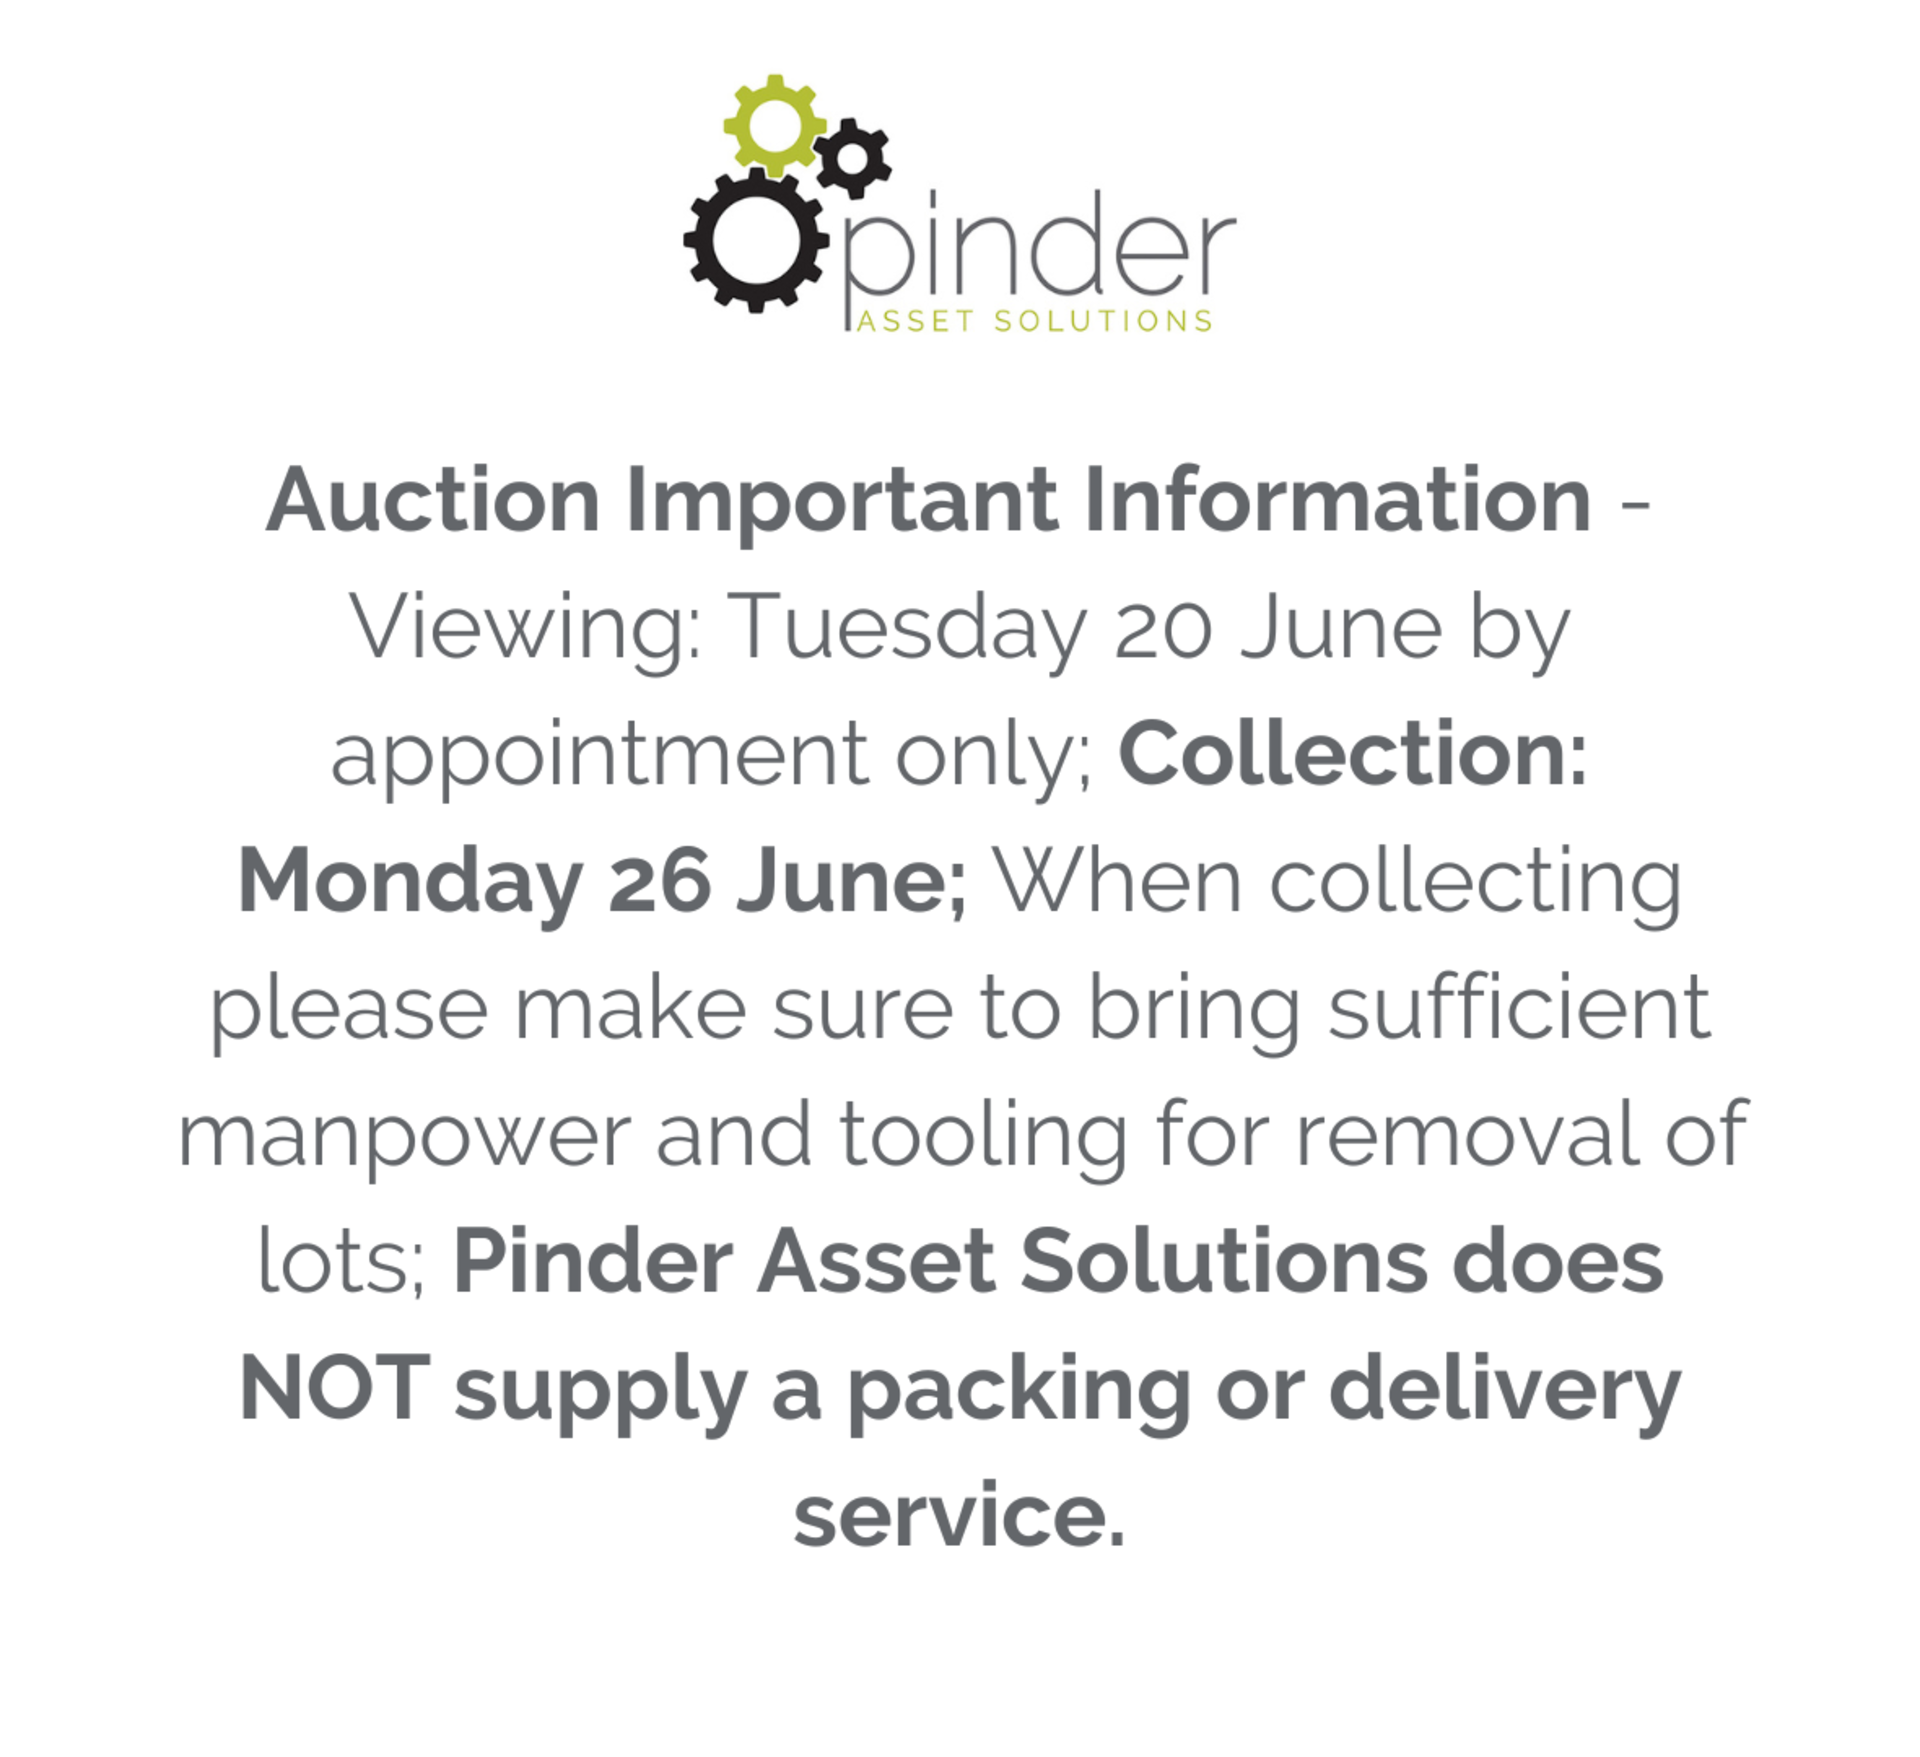 Auction Important Information - Viewing: Tuesday 20 June by appointment only; Collection: Monday